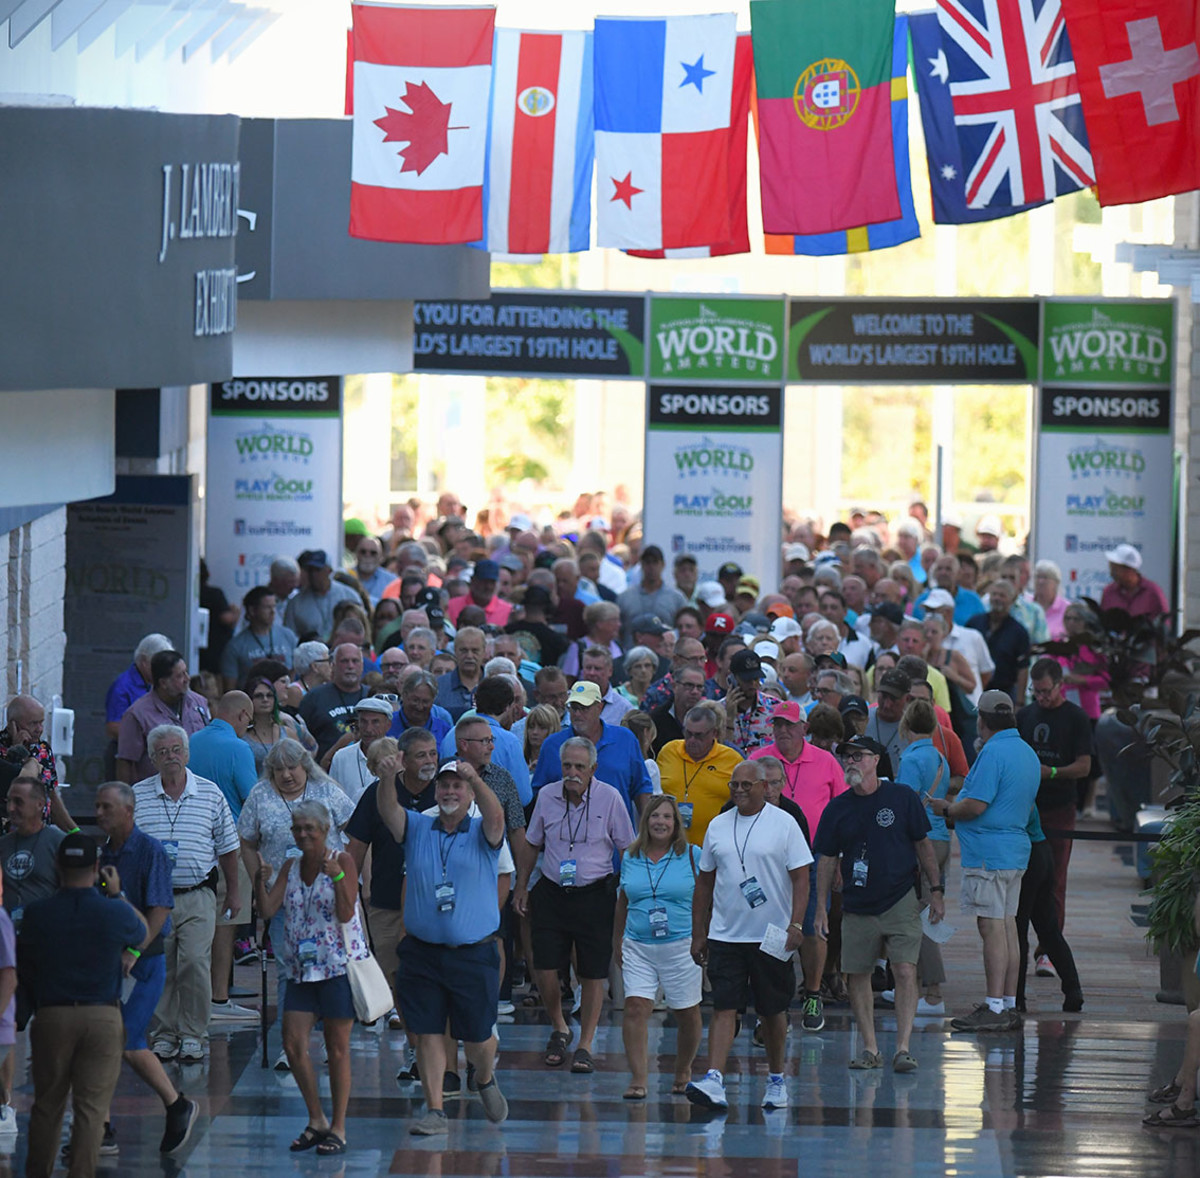 Players crowd into the World's Largest 19th Hole at the 2023 Myrtle Beach World Amateur.